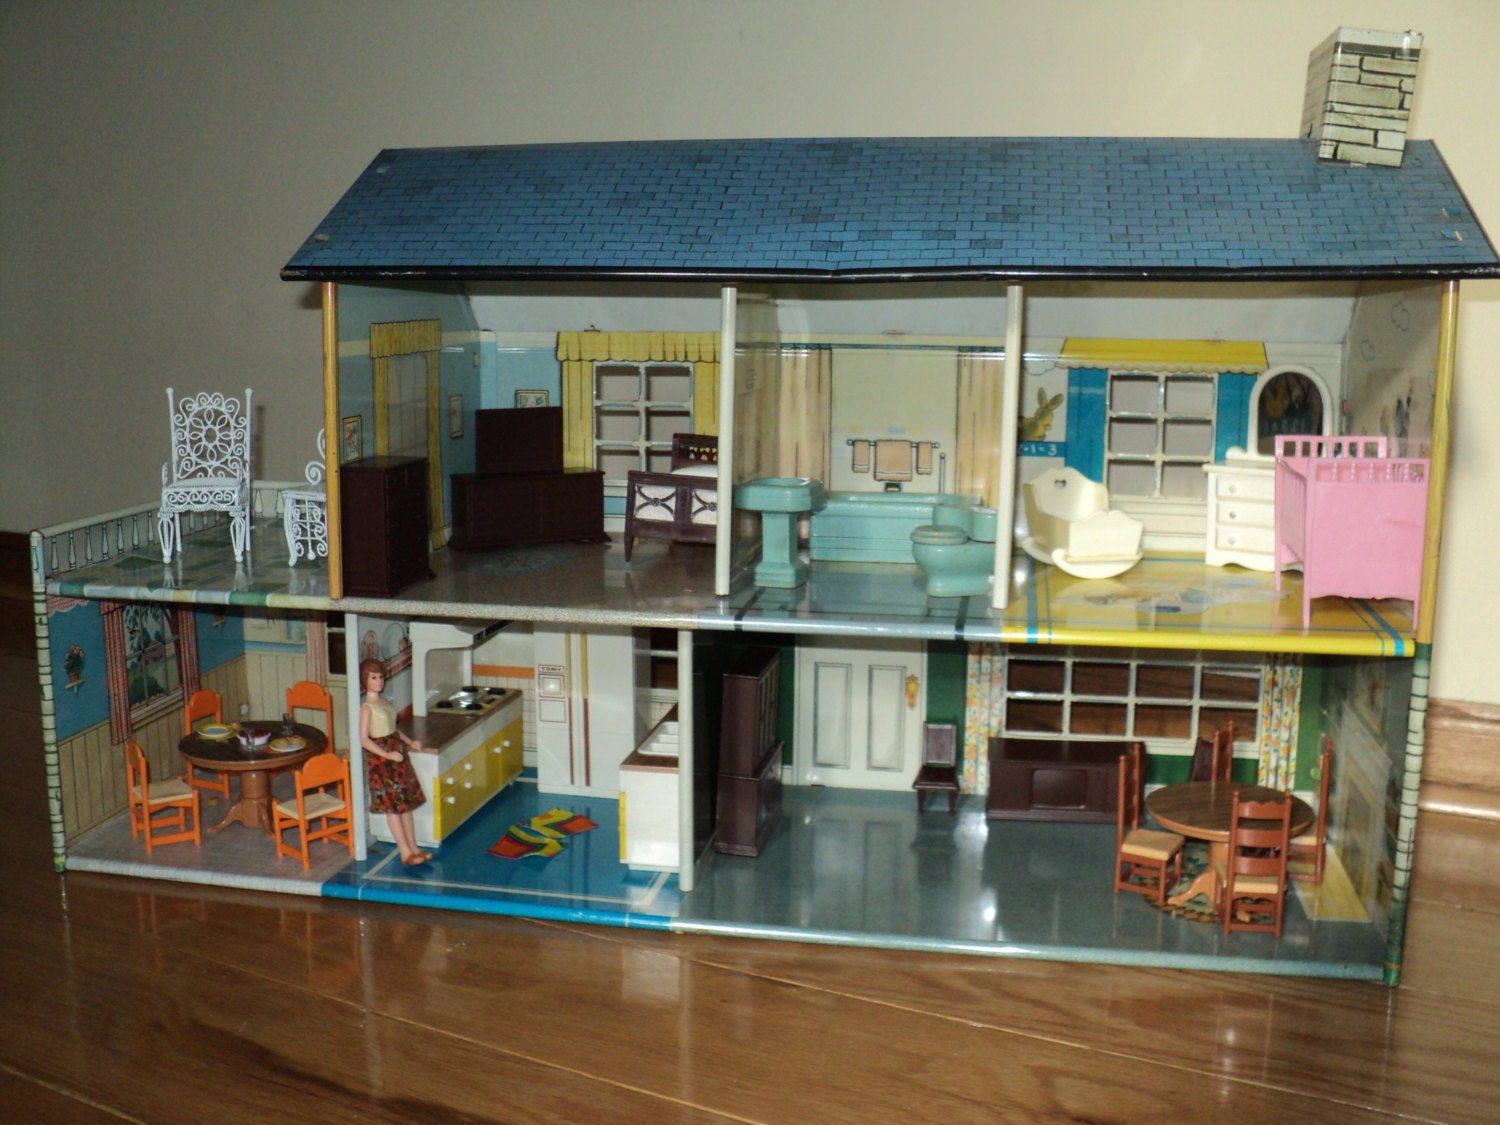 Vintage Metal Dollhouse in Very Good Condition with dollhouse